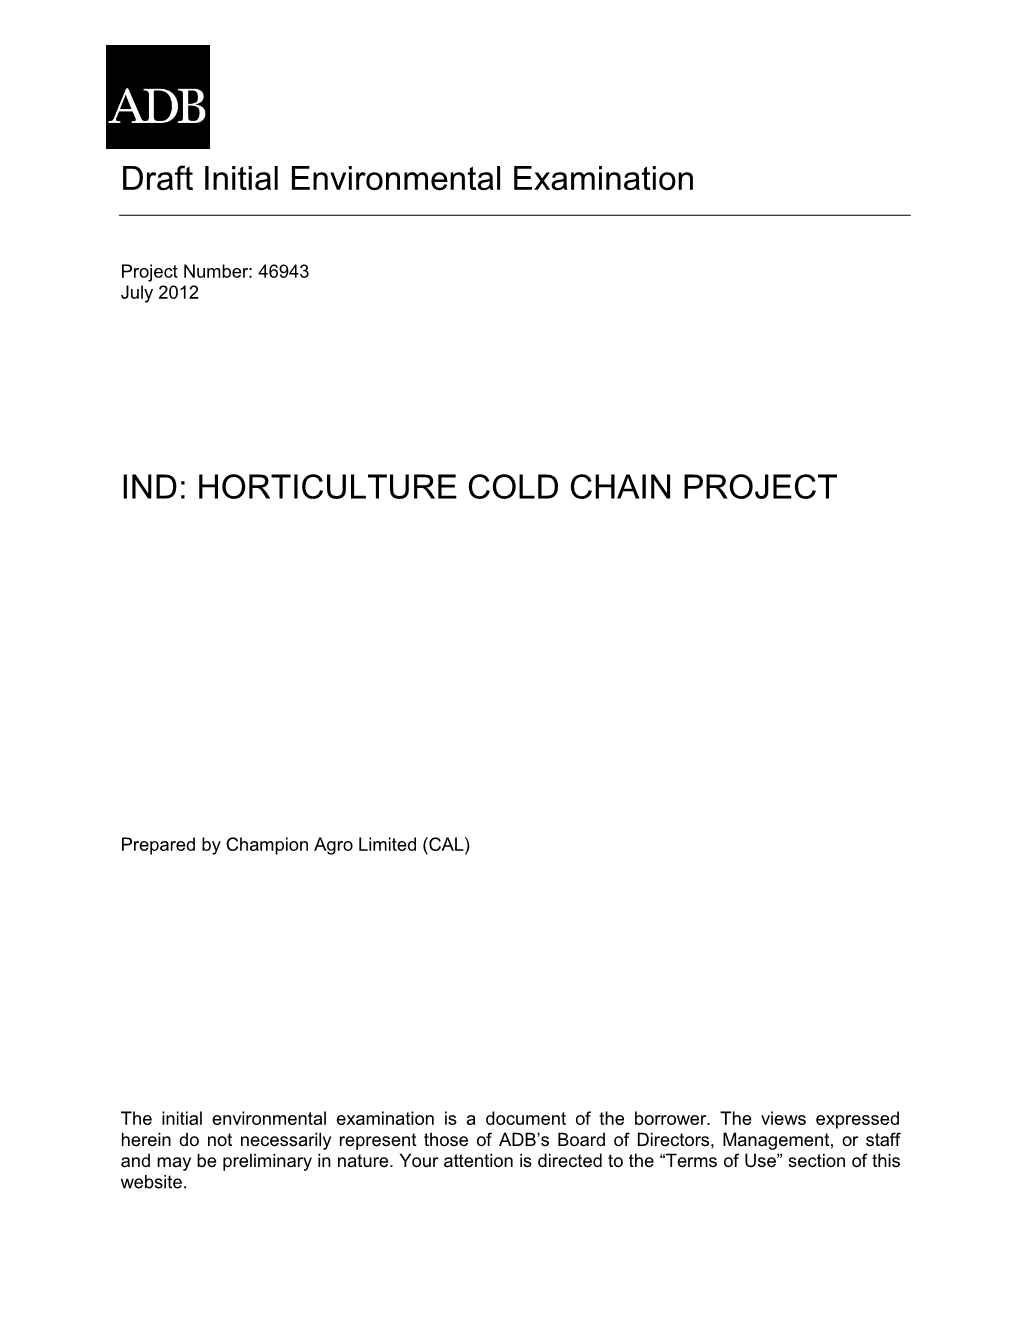 Horticulture Cold Chain Project